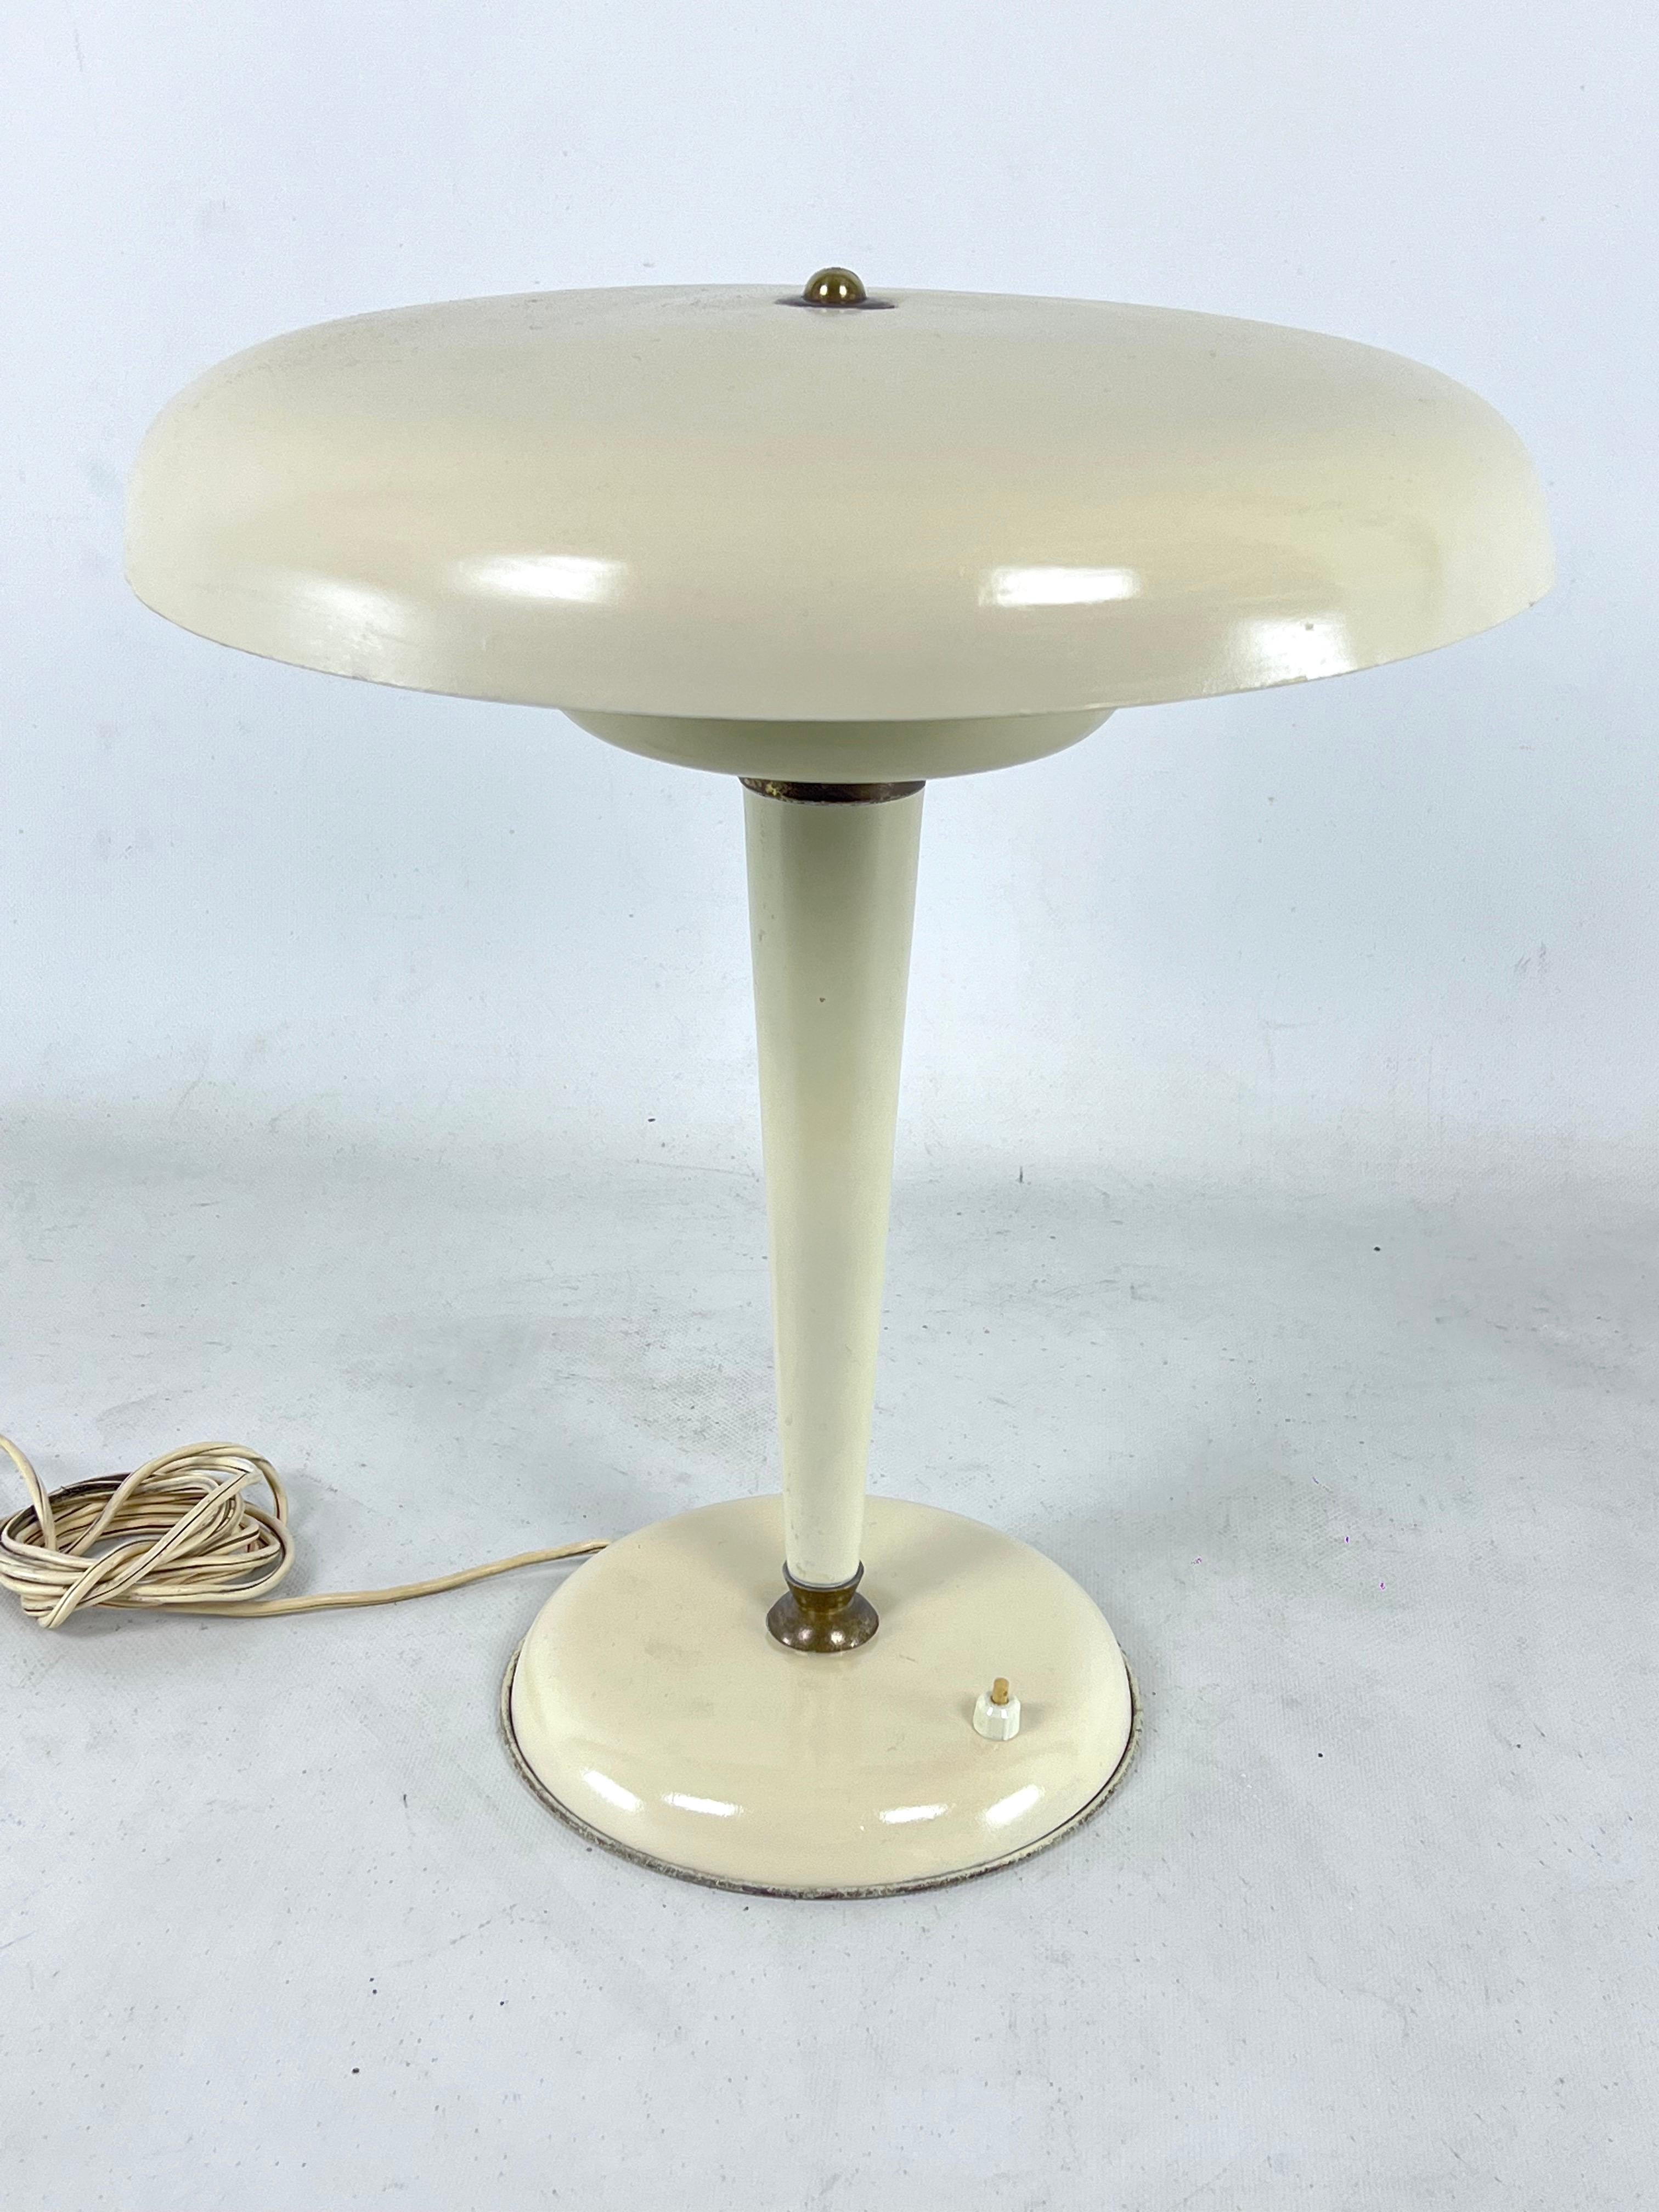 20th Century Midcentury Italian Ministerial Desk Lamp in Brass and Ivory Lacquer, Italy, 1950 For Sale